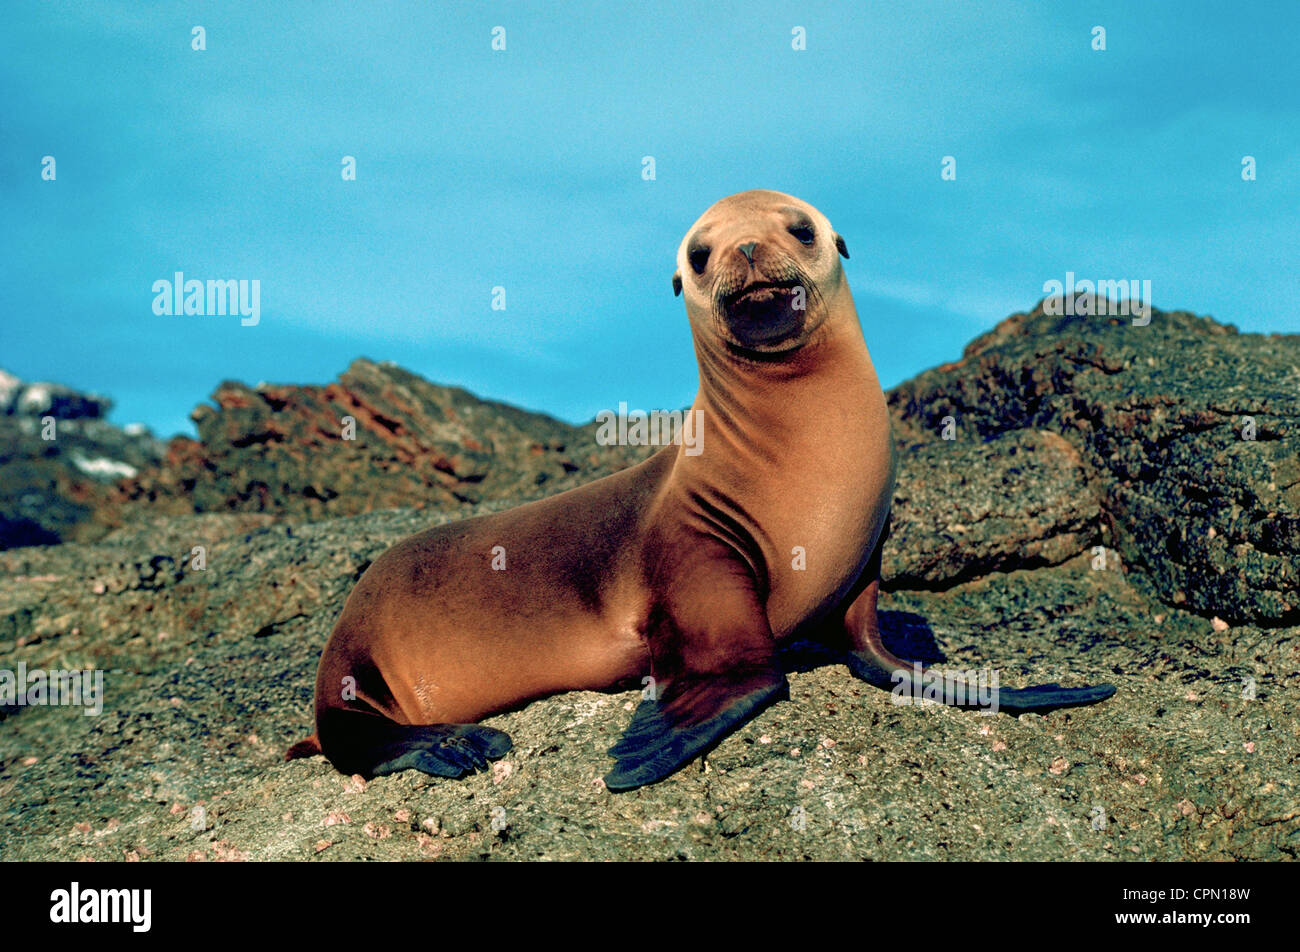 A young California sea lion poses for its portrait on a rocky outcropping in the Pacific Ocean off the coast of Southern California, USA. Stock Photo